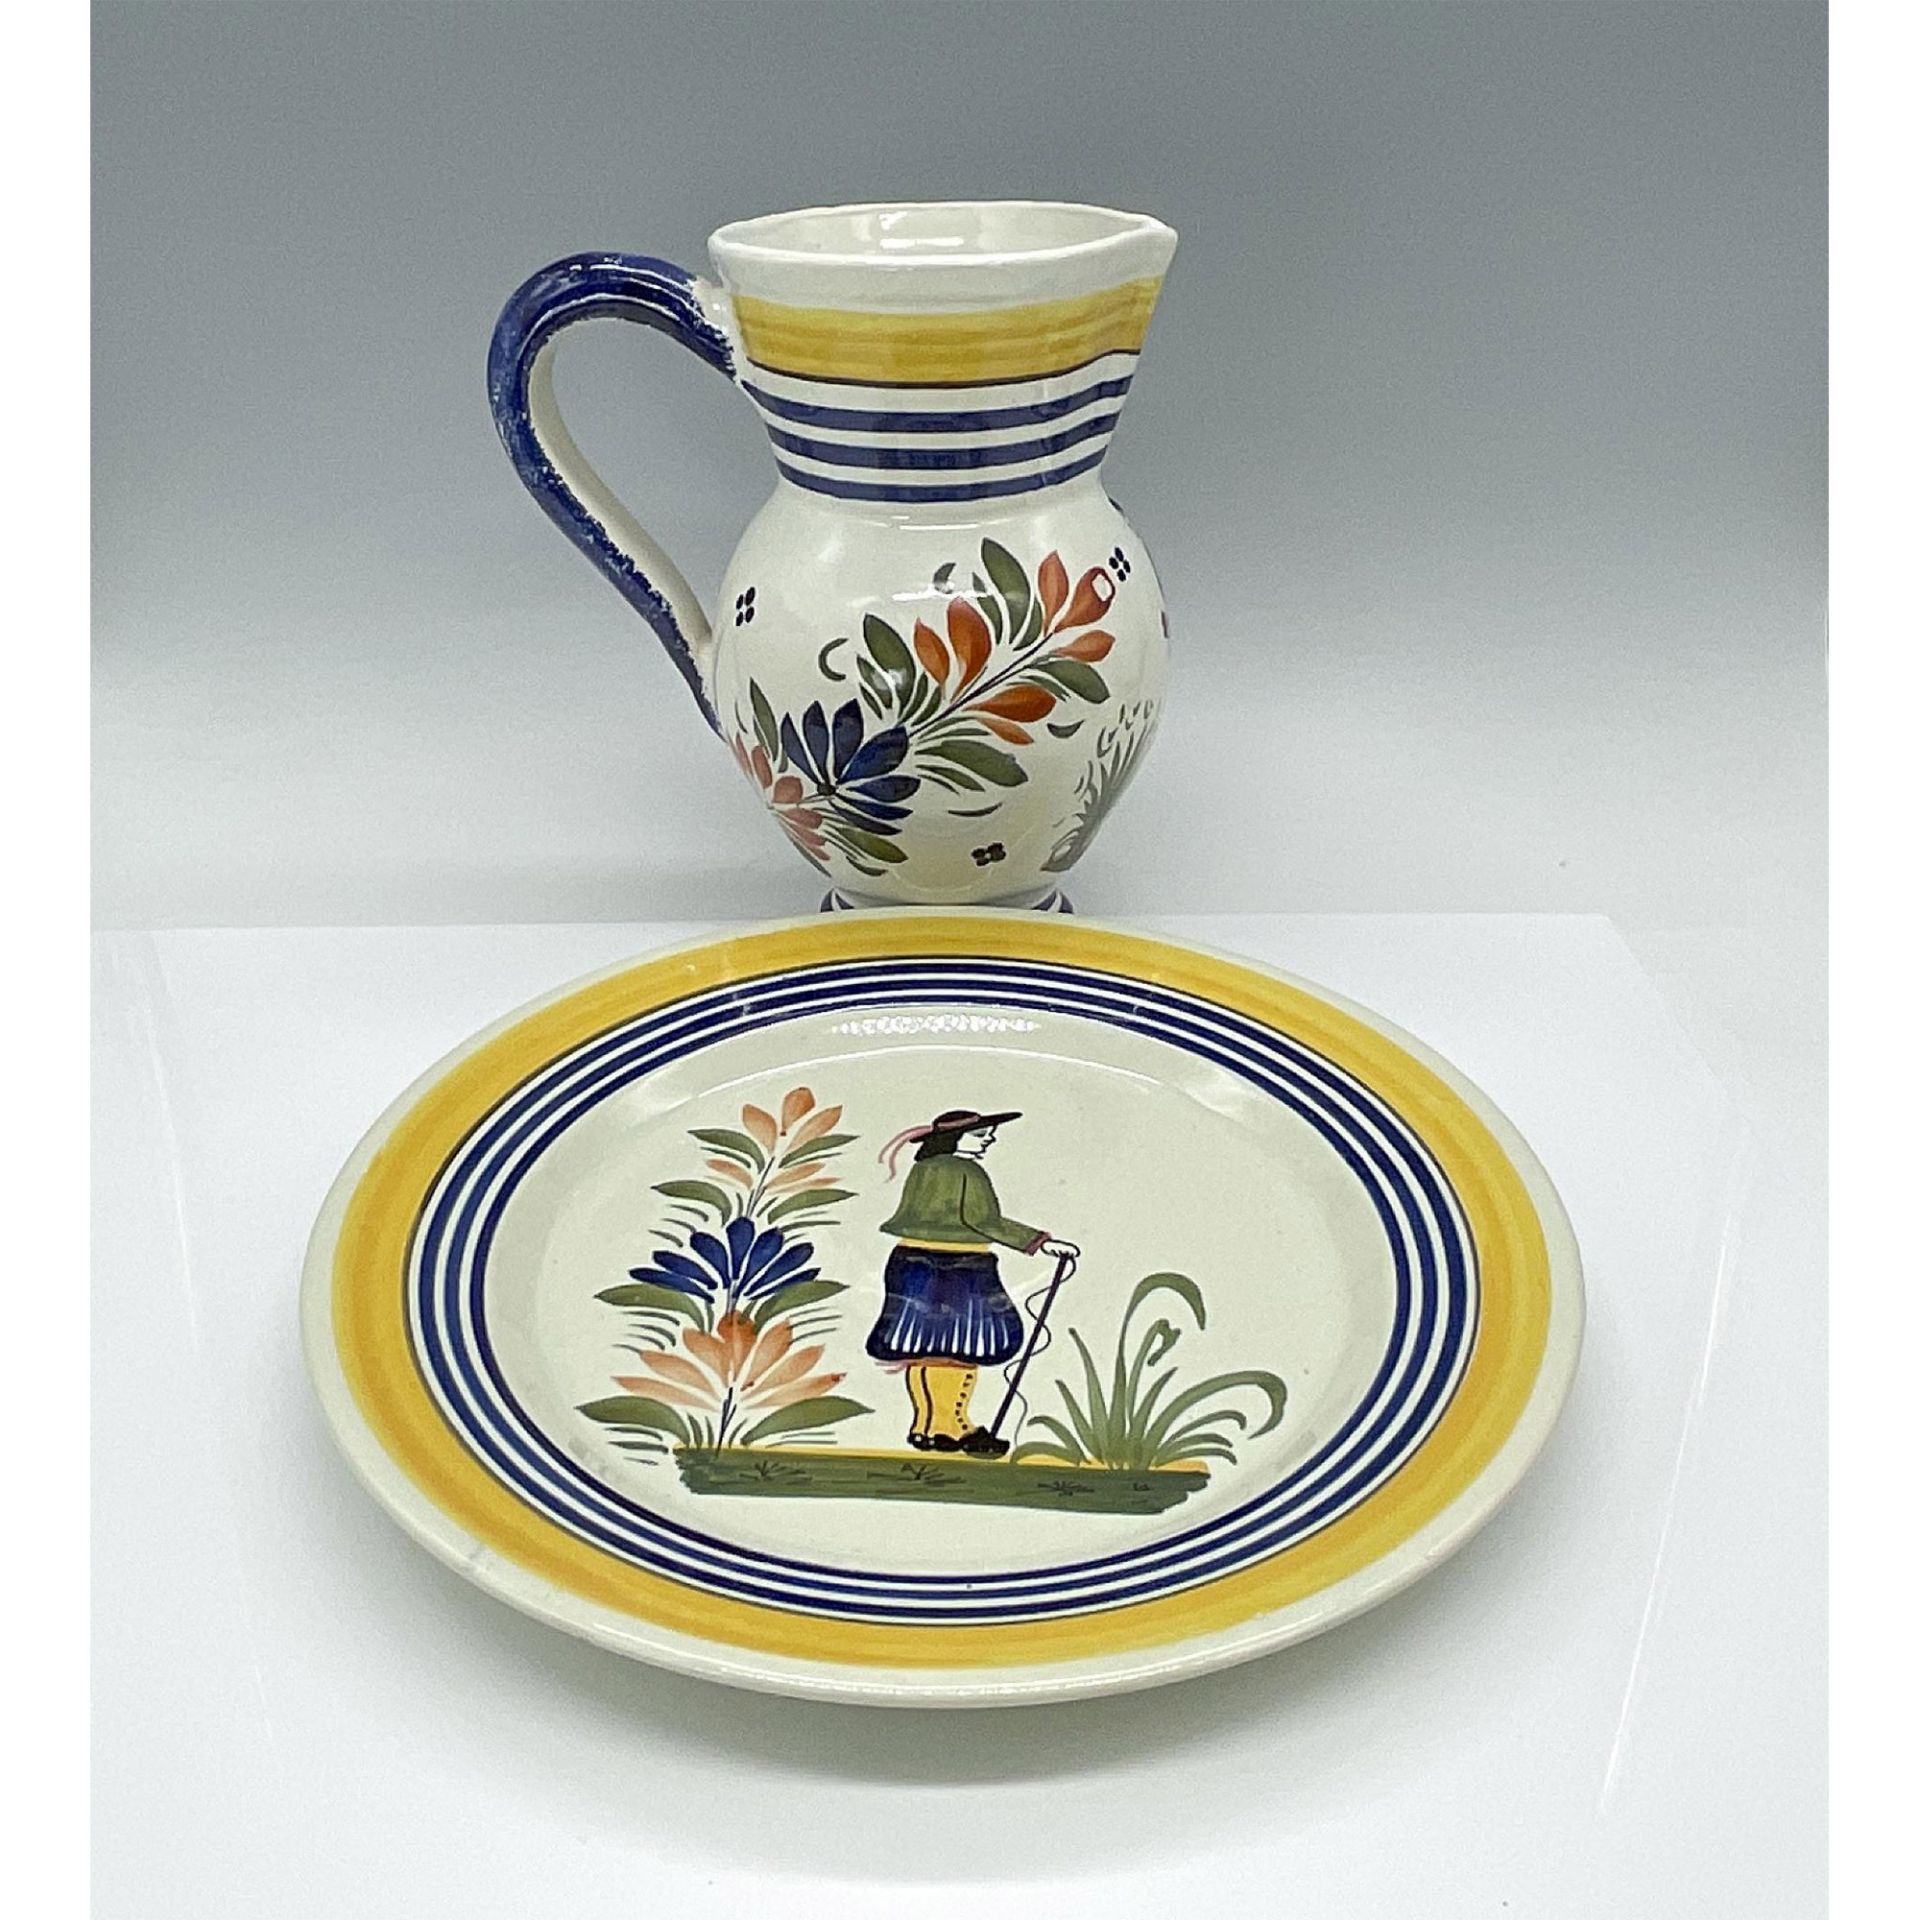 2pc Henriot Quimper Tableware Plate and Pitcher - Image 3 of 3